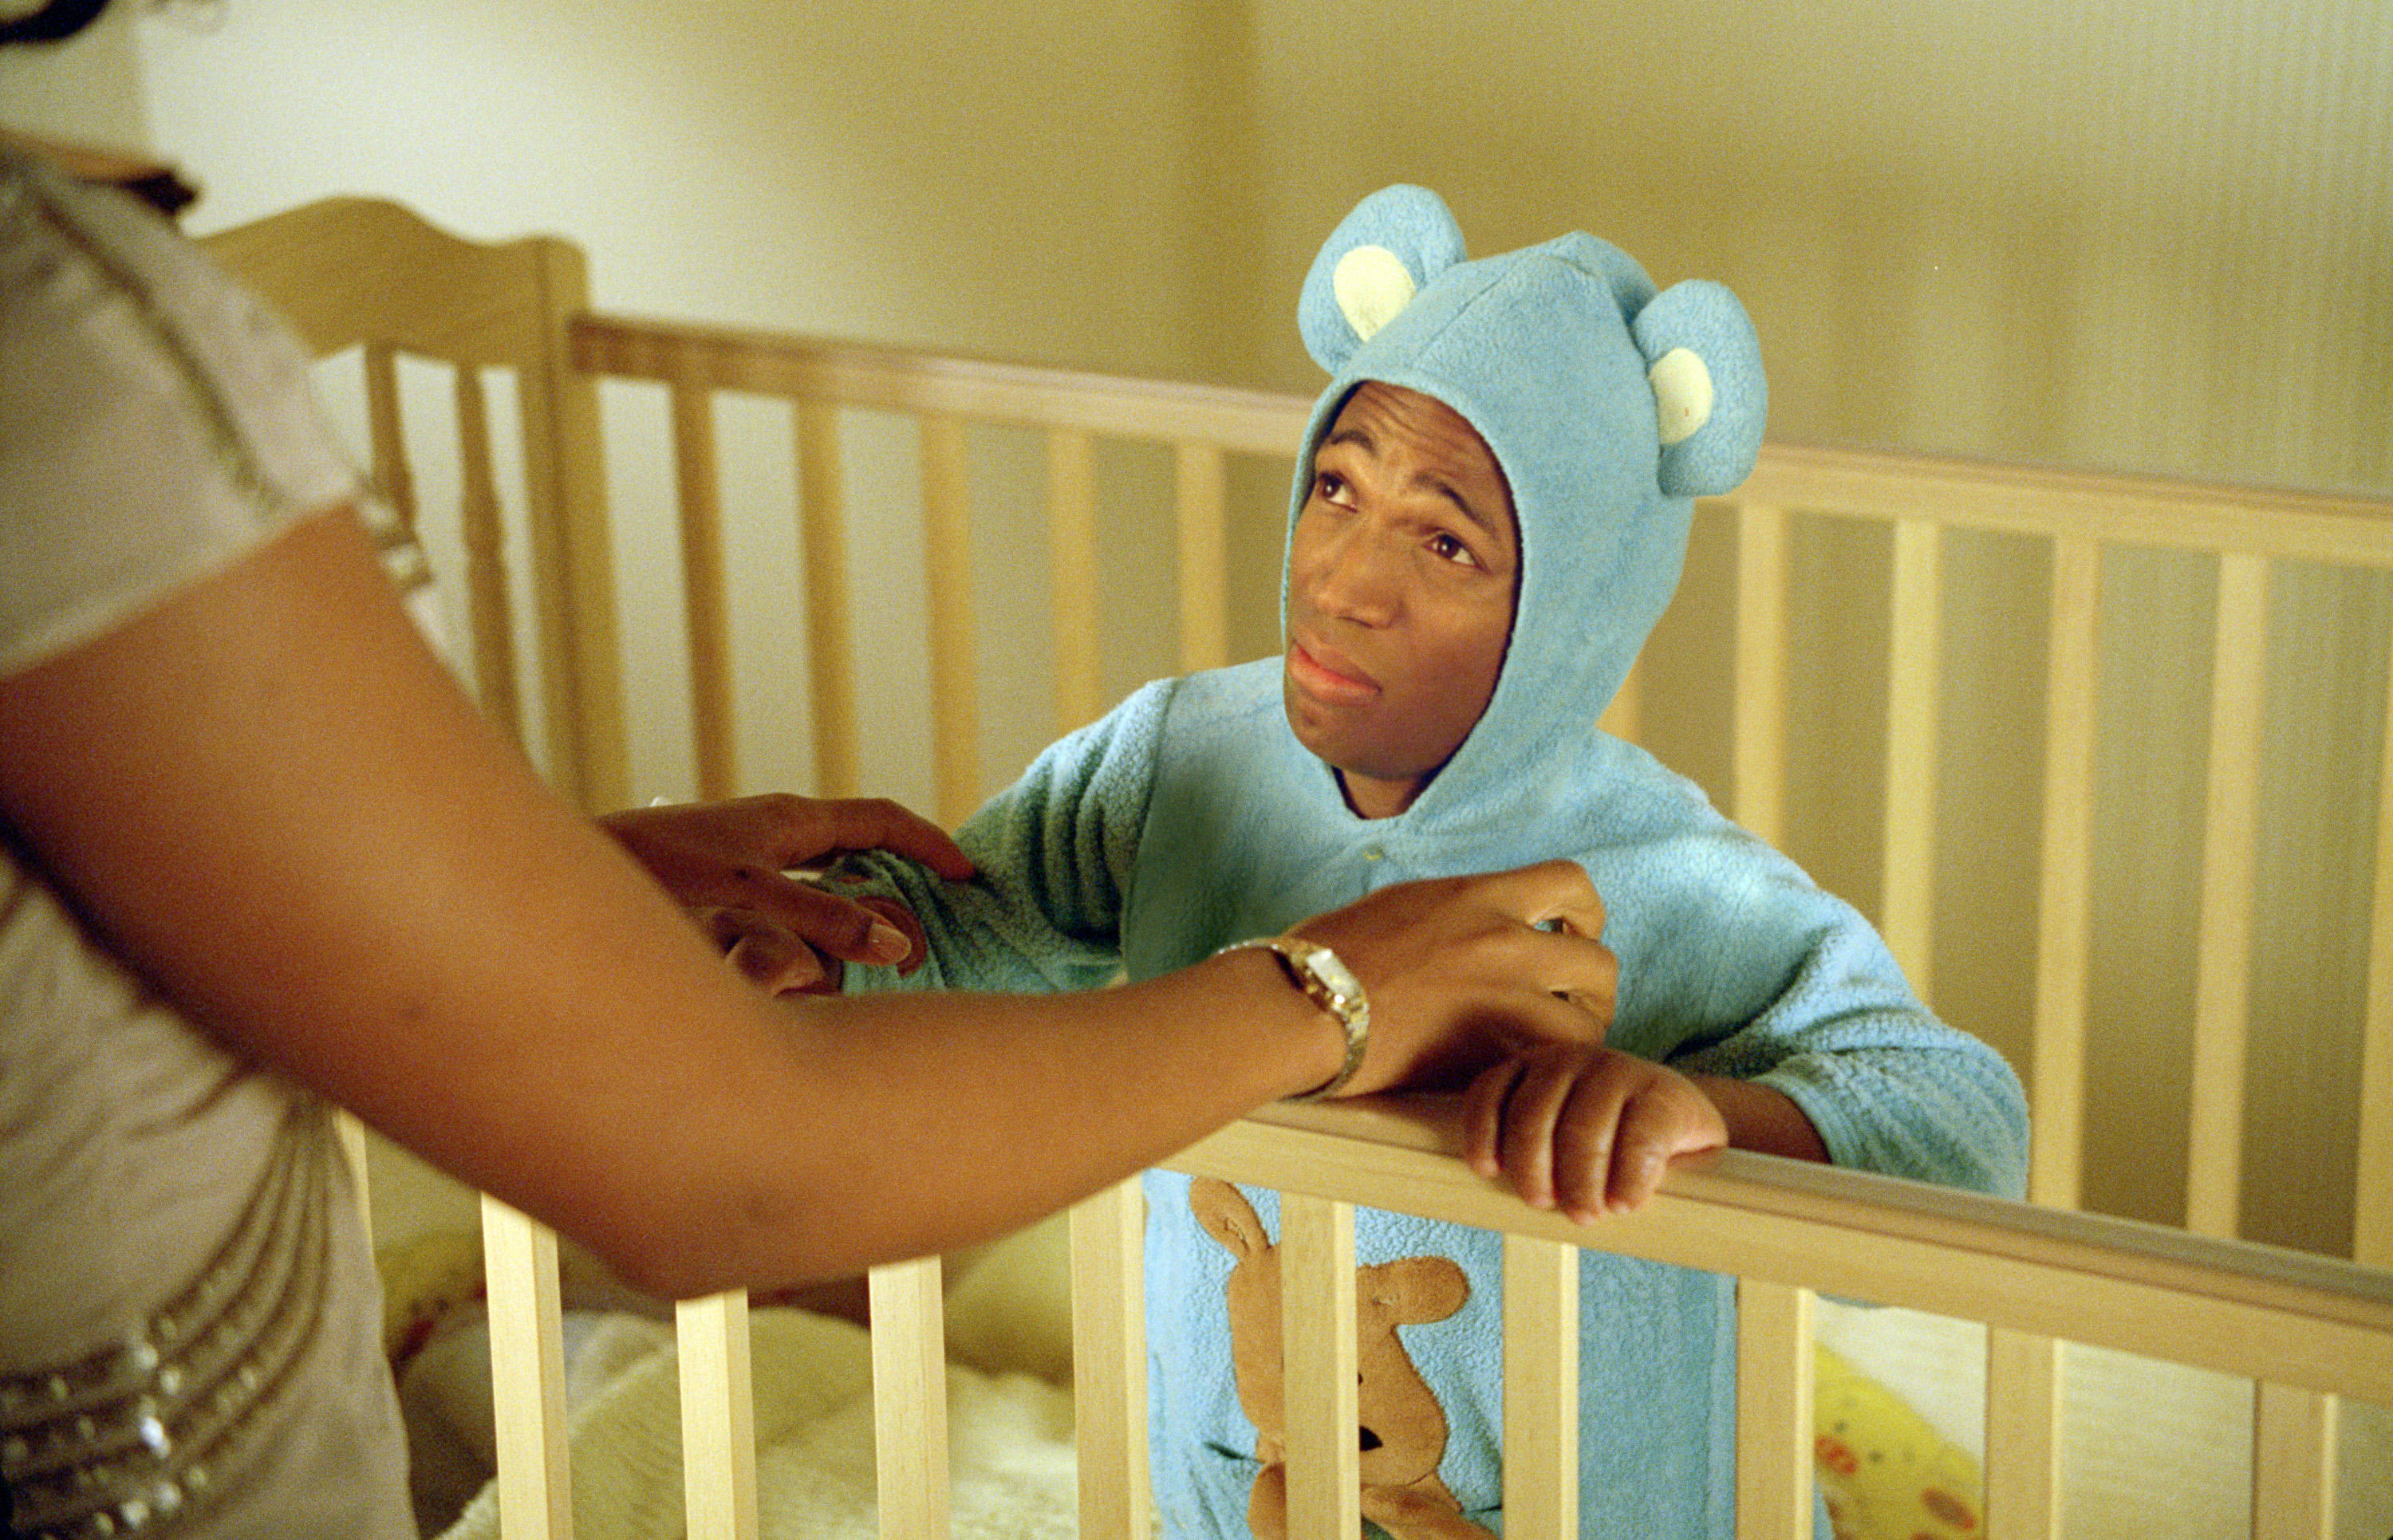 A little person pretending to be an infant winces when forced to wear a teddy bear onesie